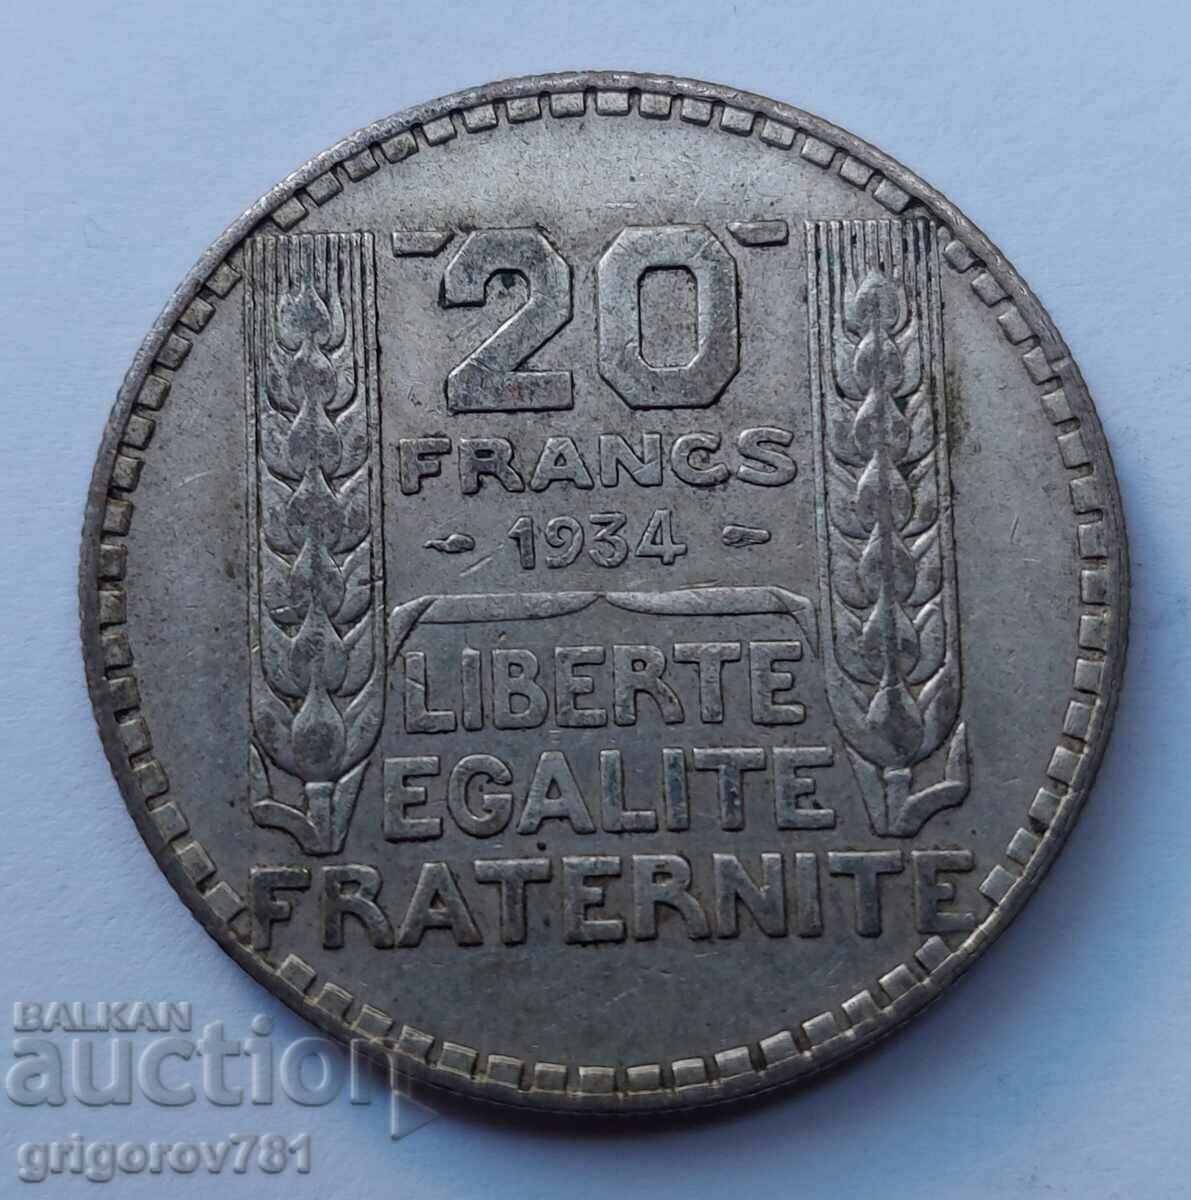 20 Francs Silver France 1934 - Silver Coin #8